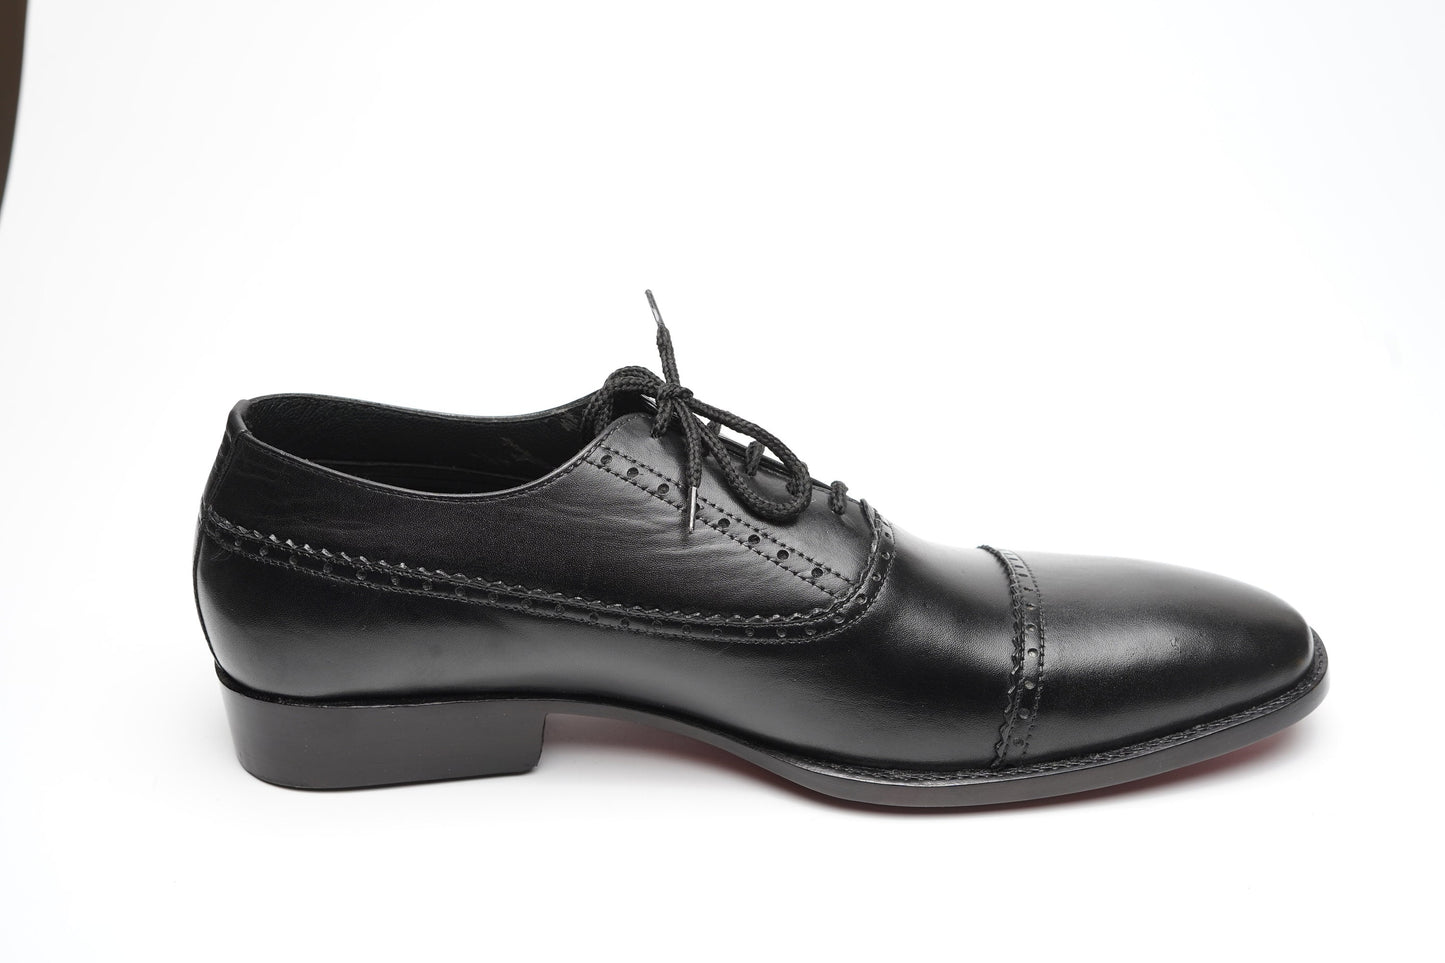 Real handmade Black Cap Toe Oxford Made of full Grain Natural Crust leather Woozy Store